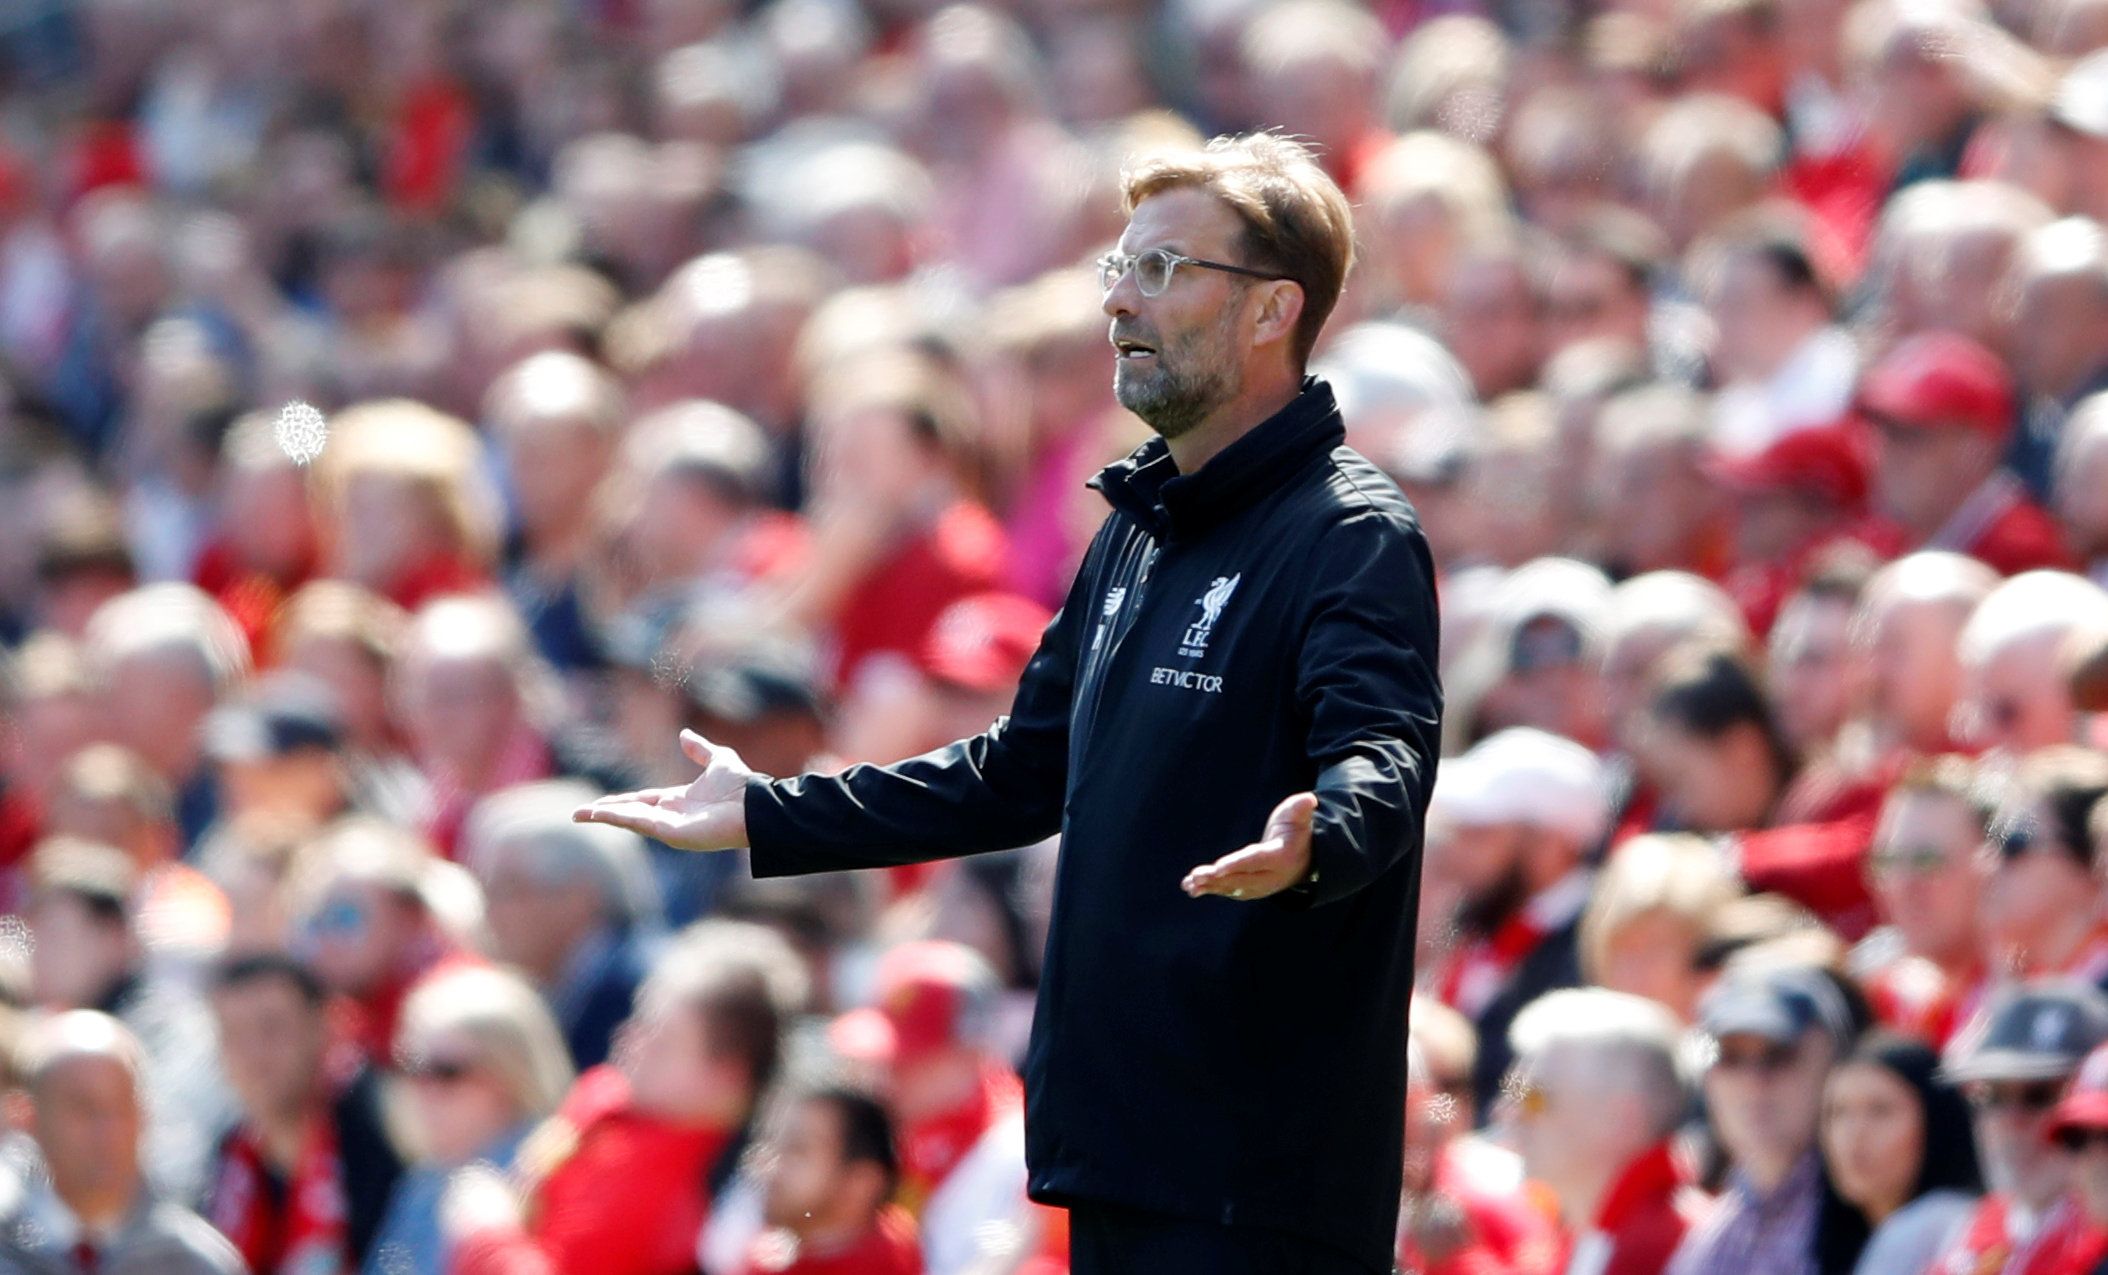 Soccer Football - Premier League - Liverpool vs Brighton &amp; Hove Albion - Anfield, Liverpool, Britain - May 13, 2018   Liverpool manager Juergen Klopp reacts    Action Images via Reuters/Carl Recine    EDITORIAL USE ONLY. No use with unauthorized audio, video, data, fixture lists, club/league logos or 